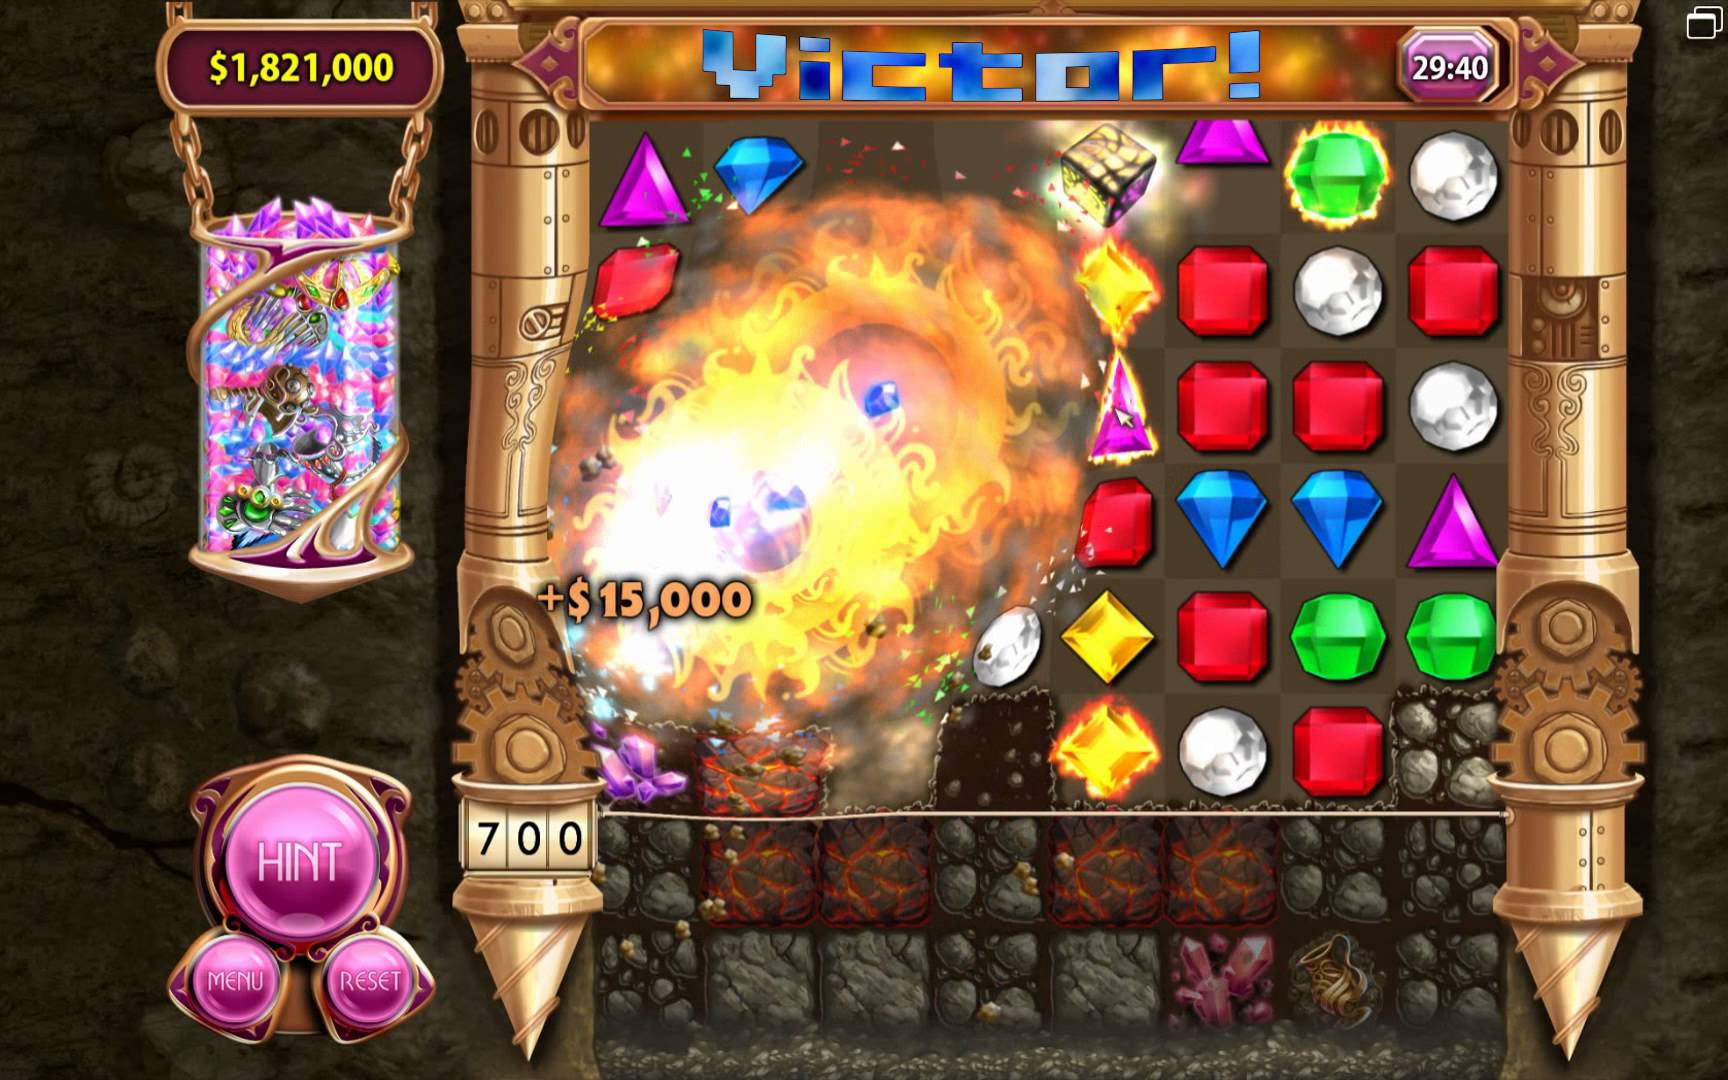 Bejeweled 3 has stunning new graphics and new modes to explore including ticking time bombs